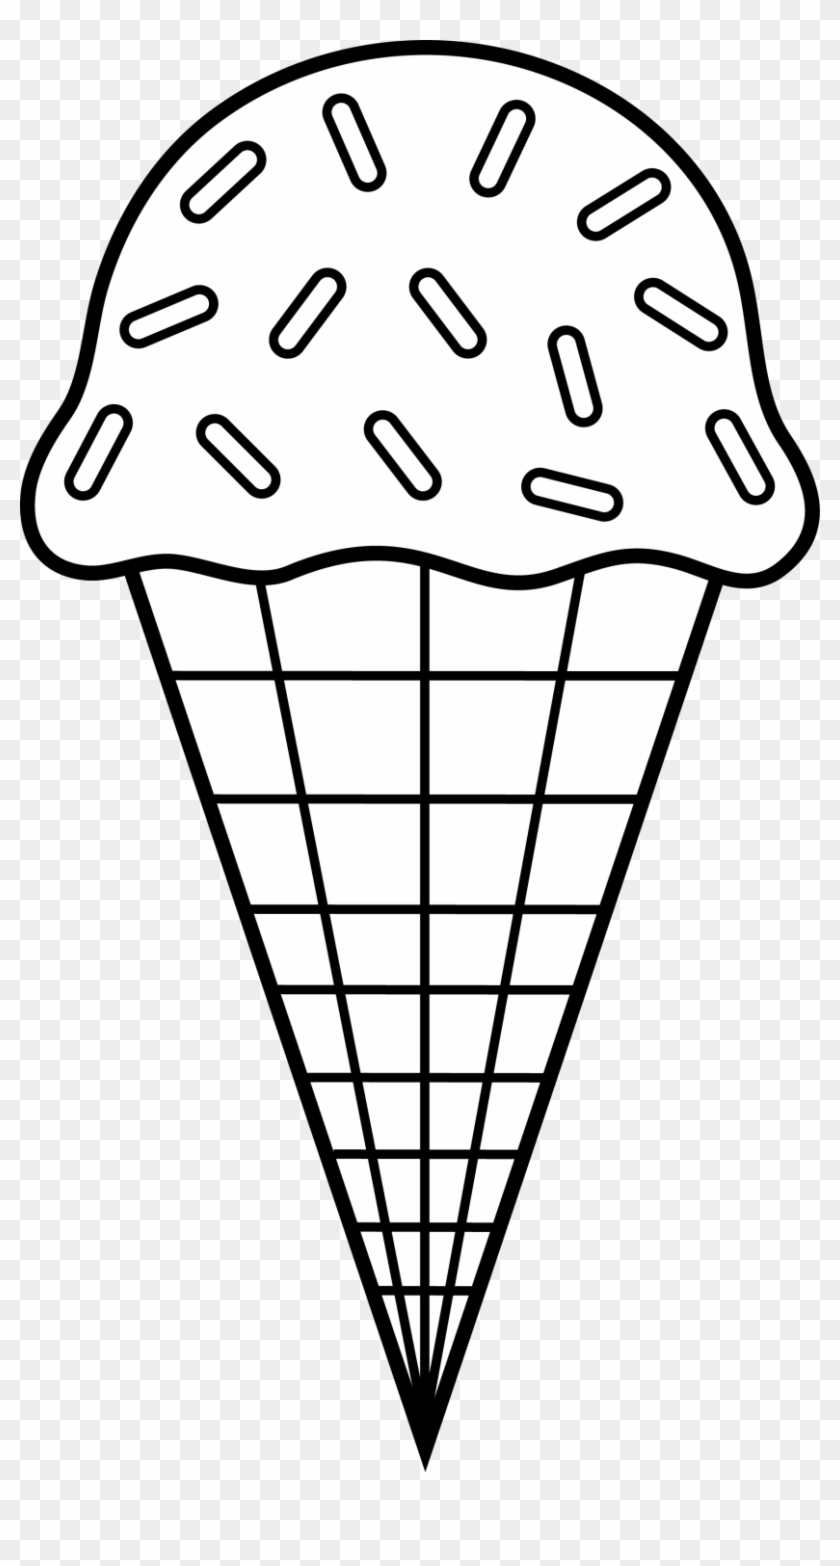 Ice Cream Black And White Clipart Black And White Ice - Ice Cream Coloring Pages #270807